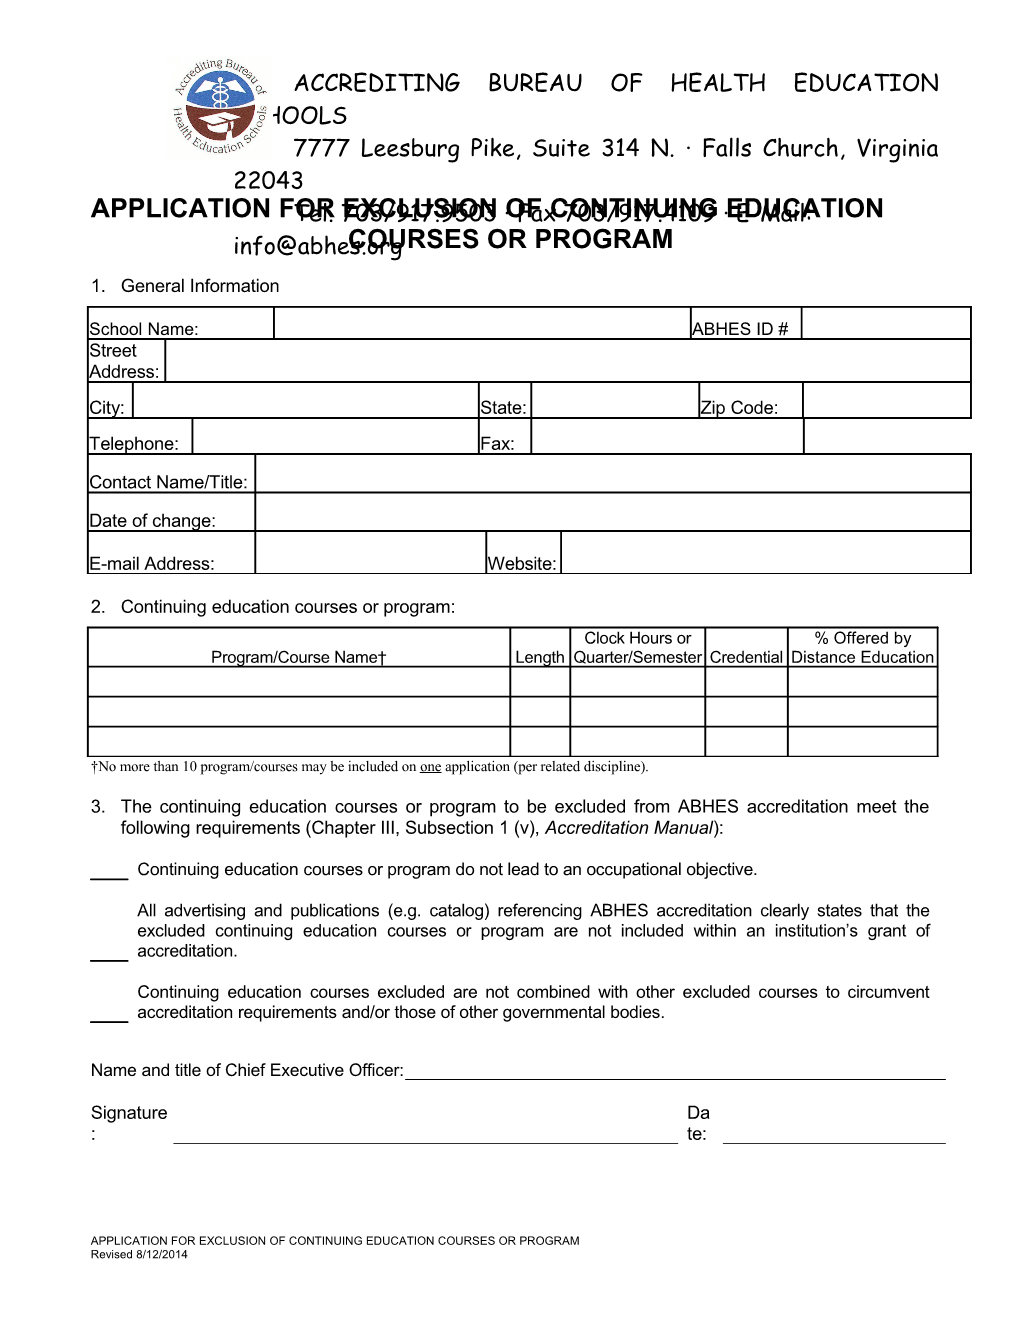 Application for Exclusion of Continuing Education